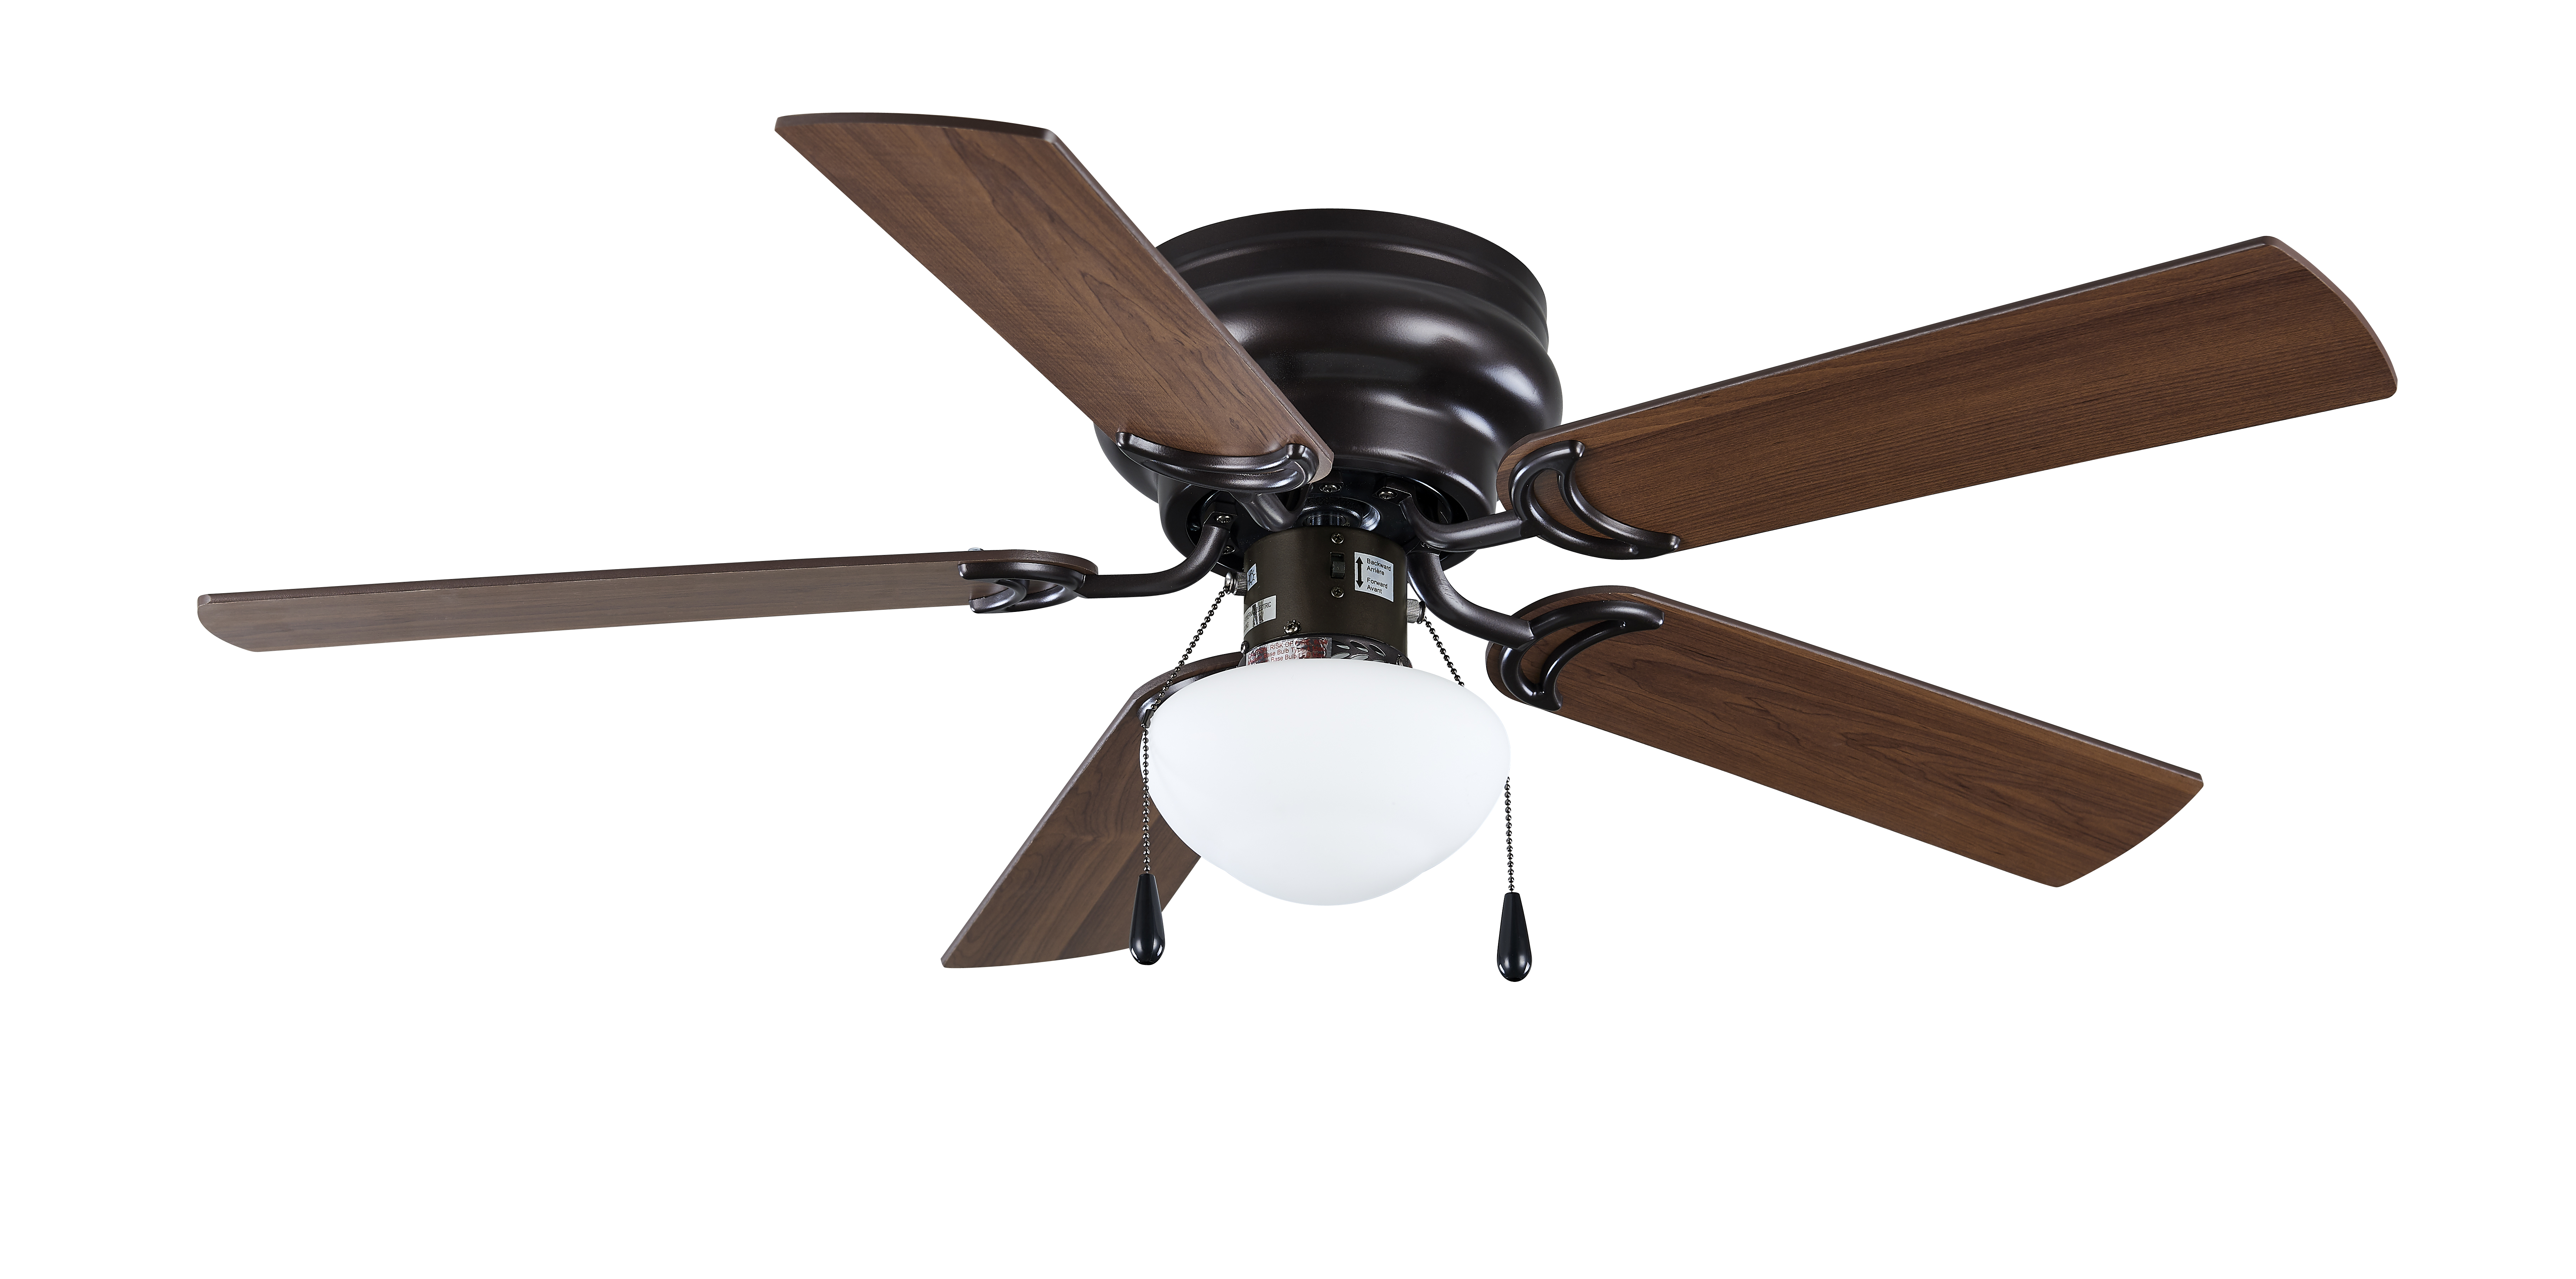 Mainstays 44" Hugger Indoor Ceiling Fan with Single Light, Bronze, 5 Blades, LED Bulb, Reverse Airflow - image 2 of 8